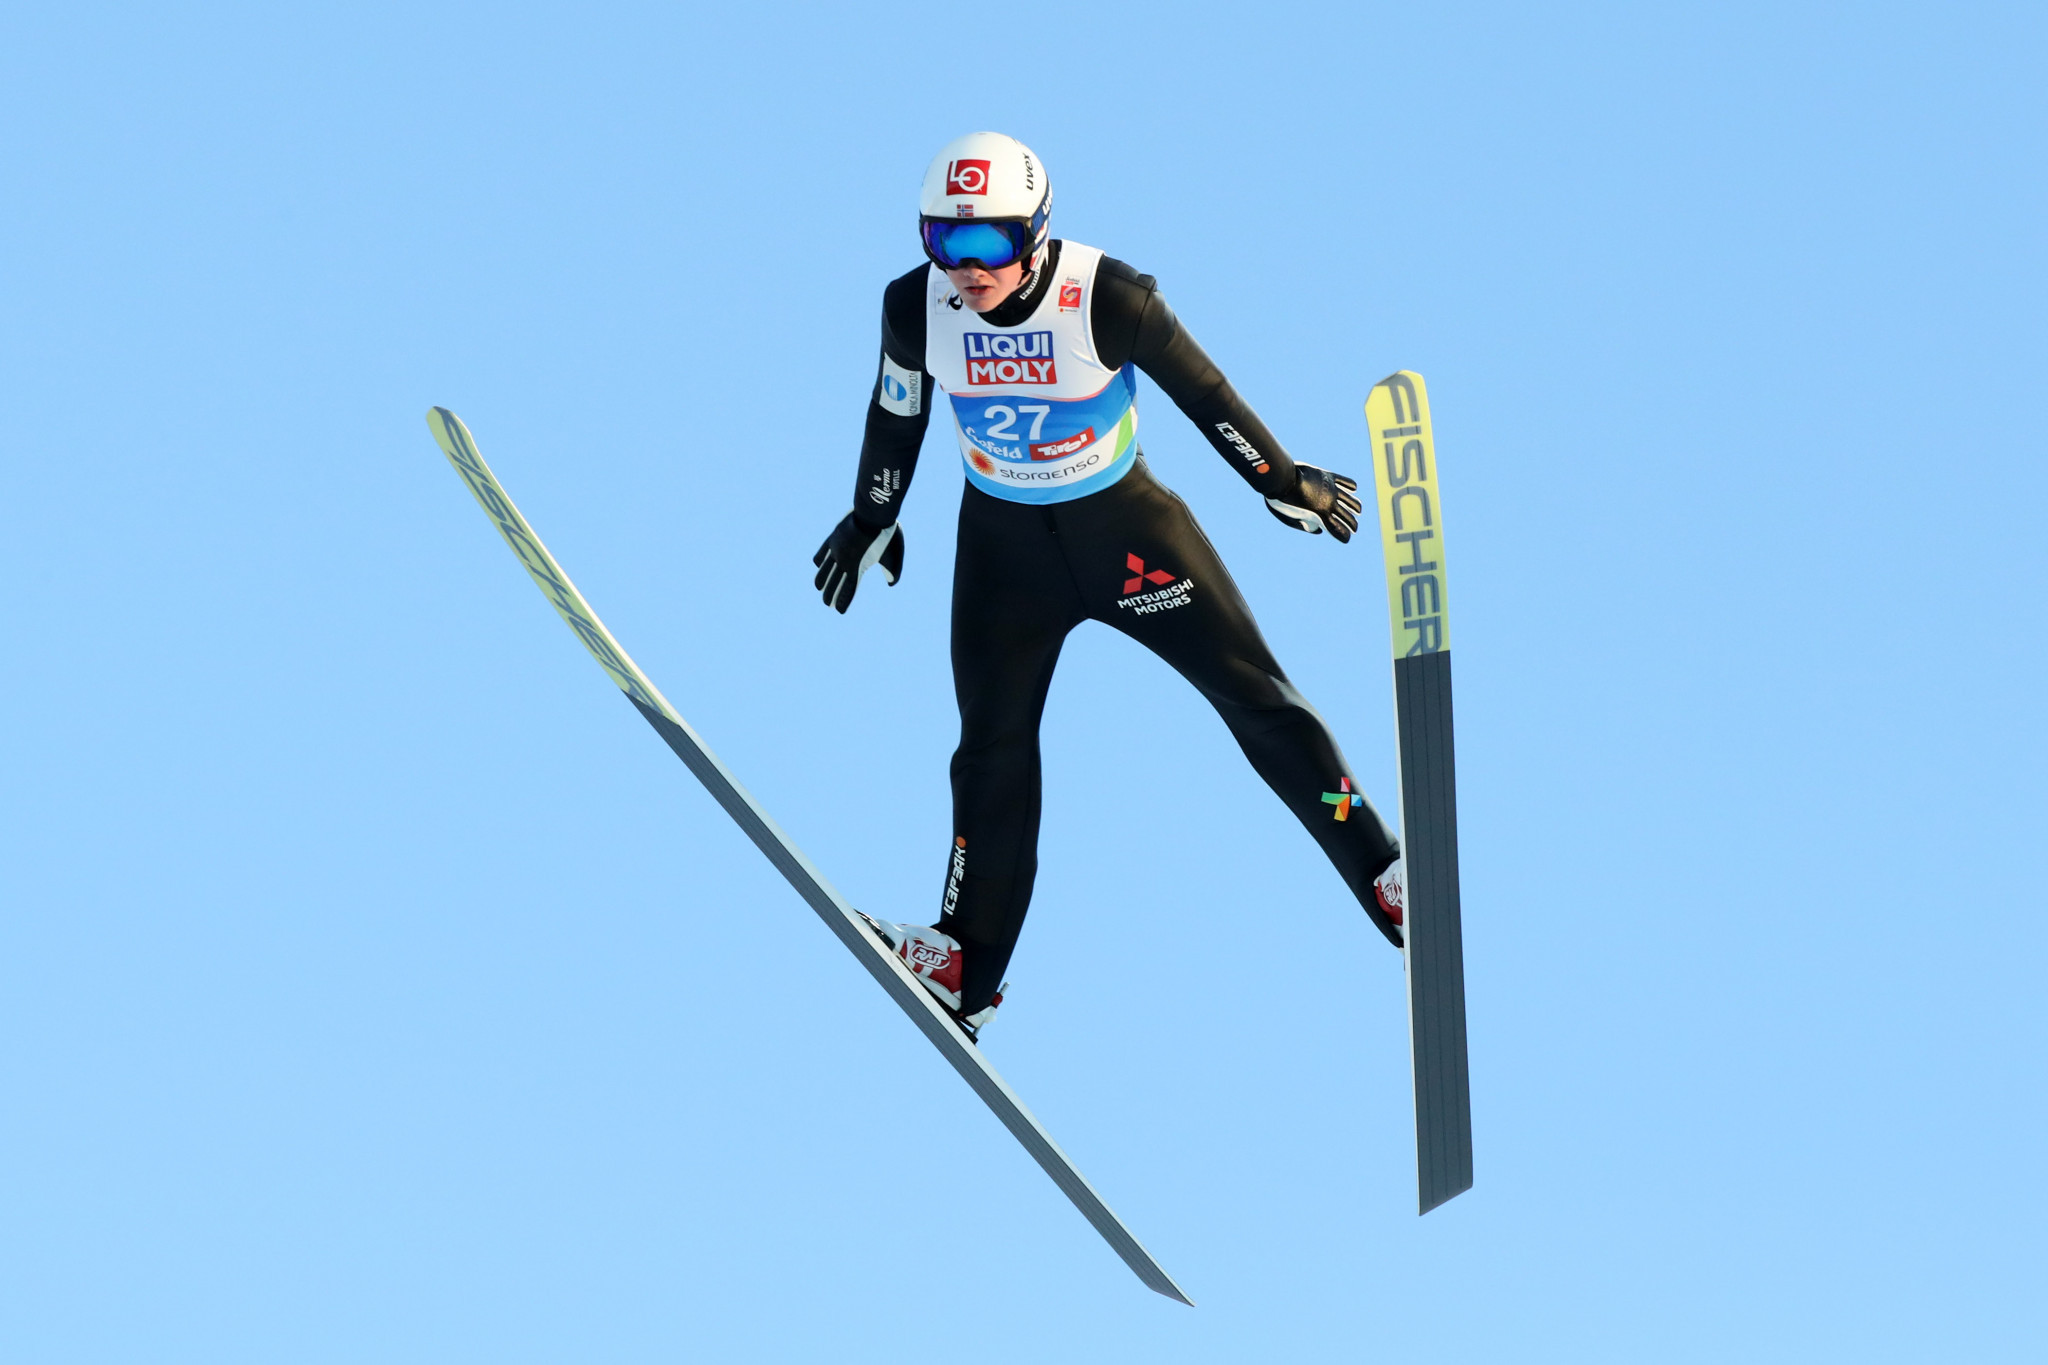 Markeng set for Ski Jumping World Cup return after 13-month injury absence